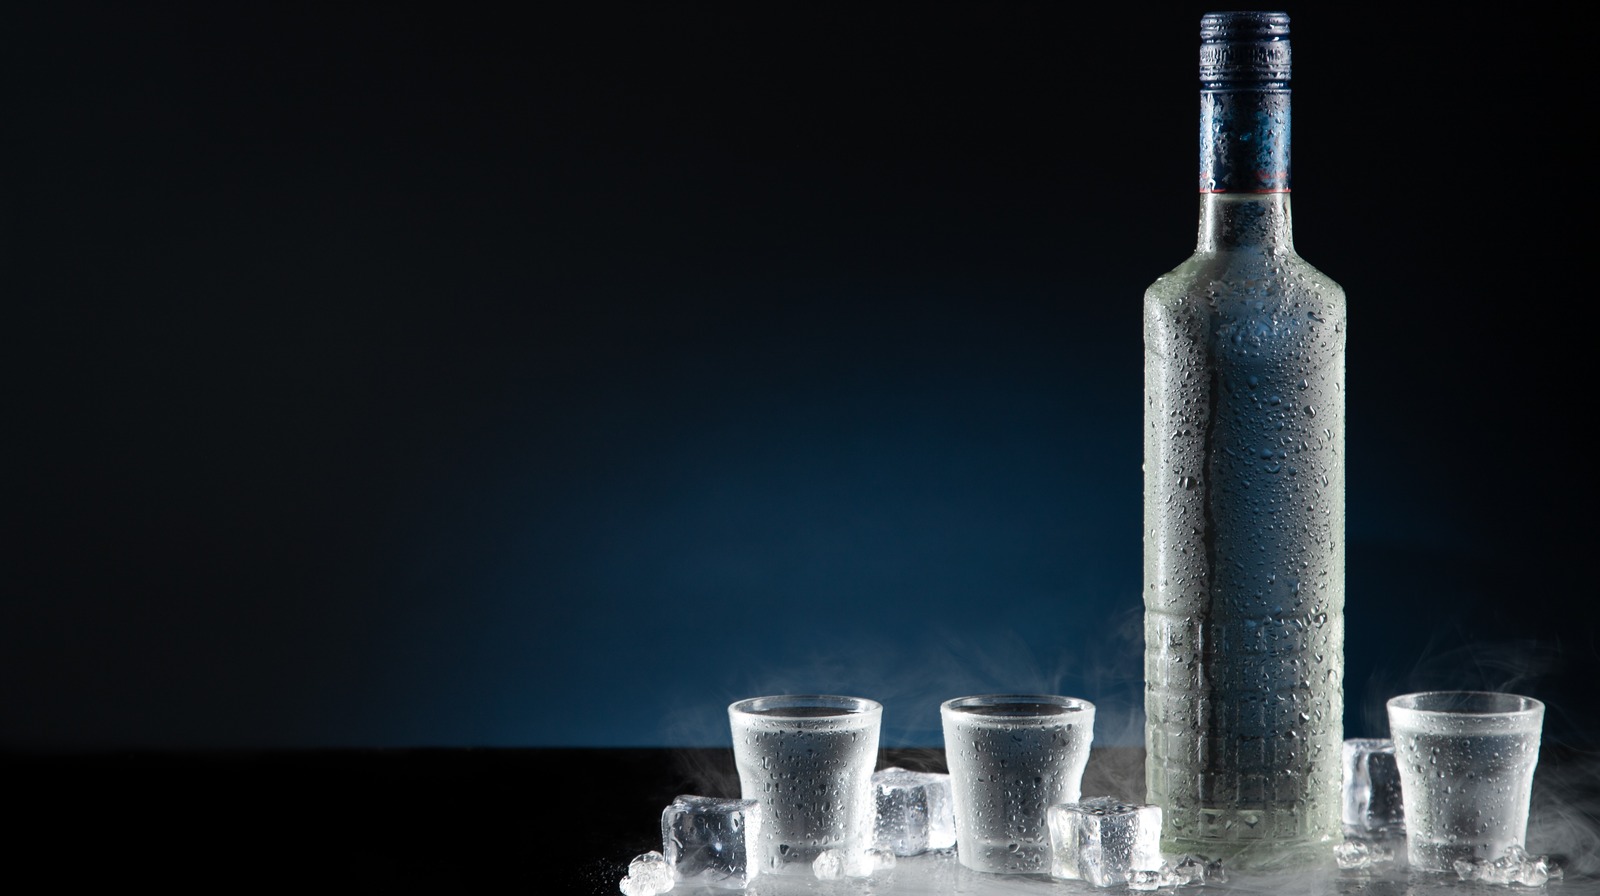 French Vodka Complete Guide